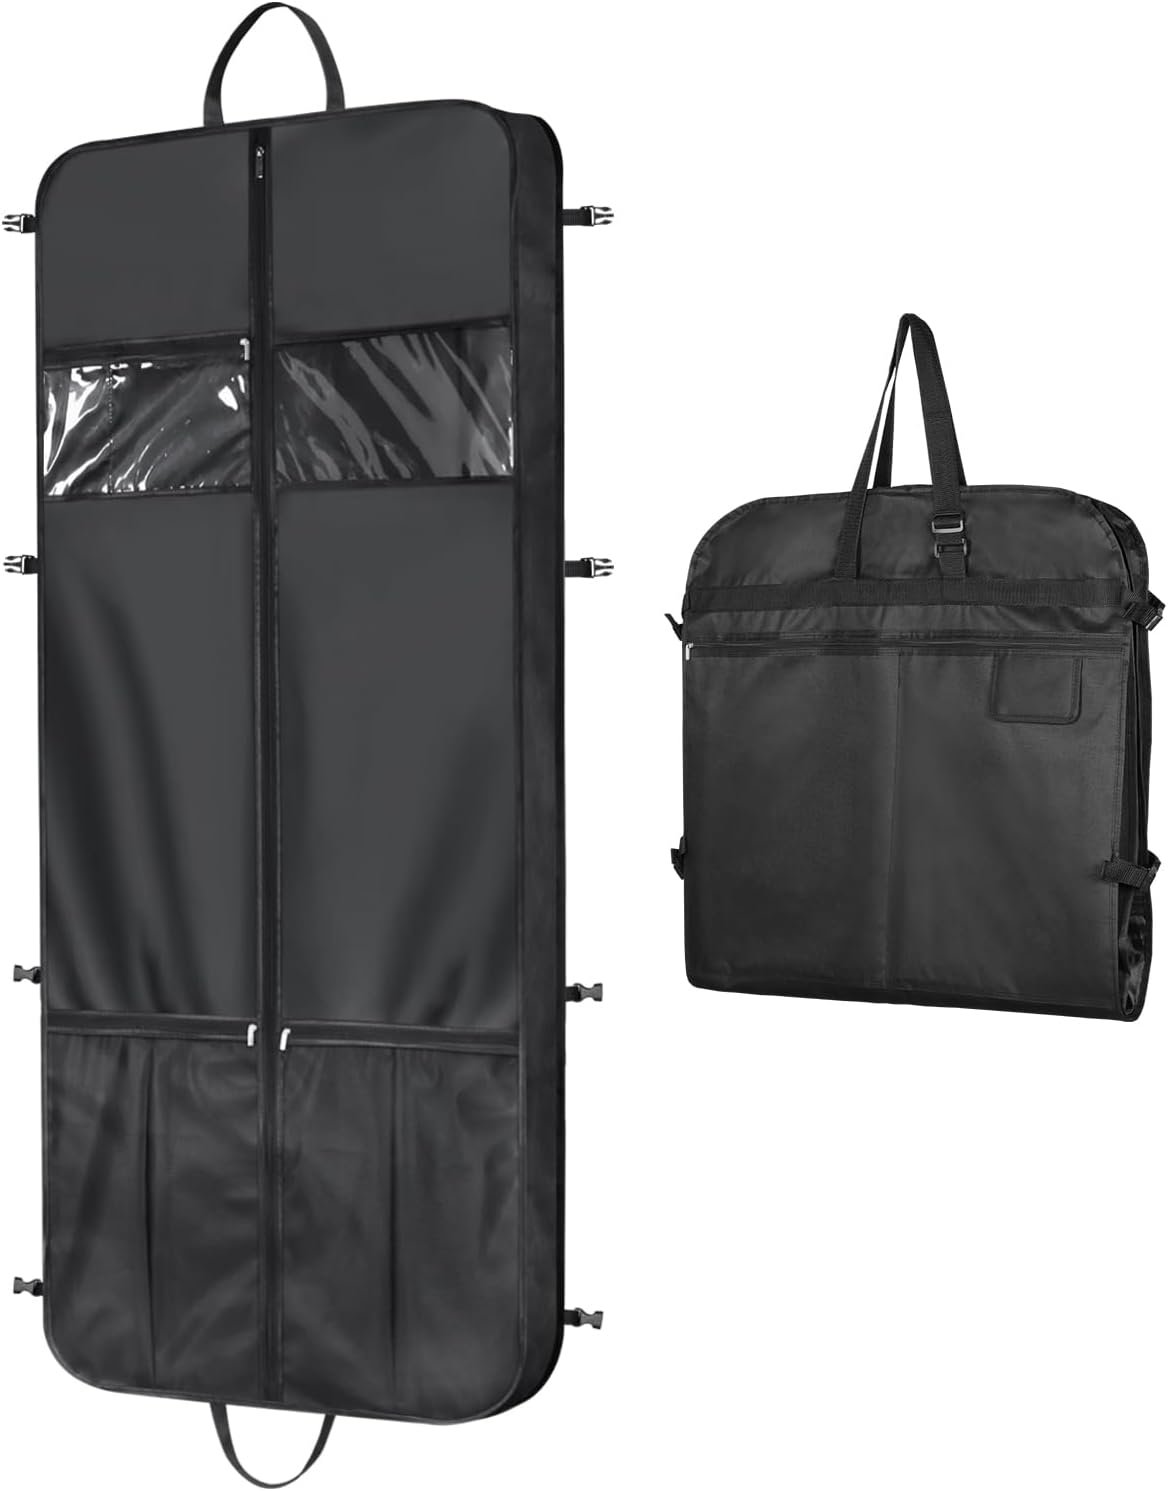 Zilink 60 Long Garment Bags for Travel Waterproof Garment Bag for Dresses Long Hanging Dress Bags for Closet Storage with Adjustable Handles and Stable Buckles for Suit Coats Tuxedos Dresses, Black